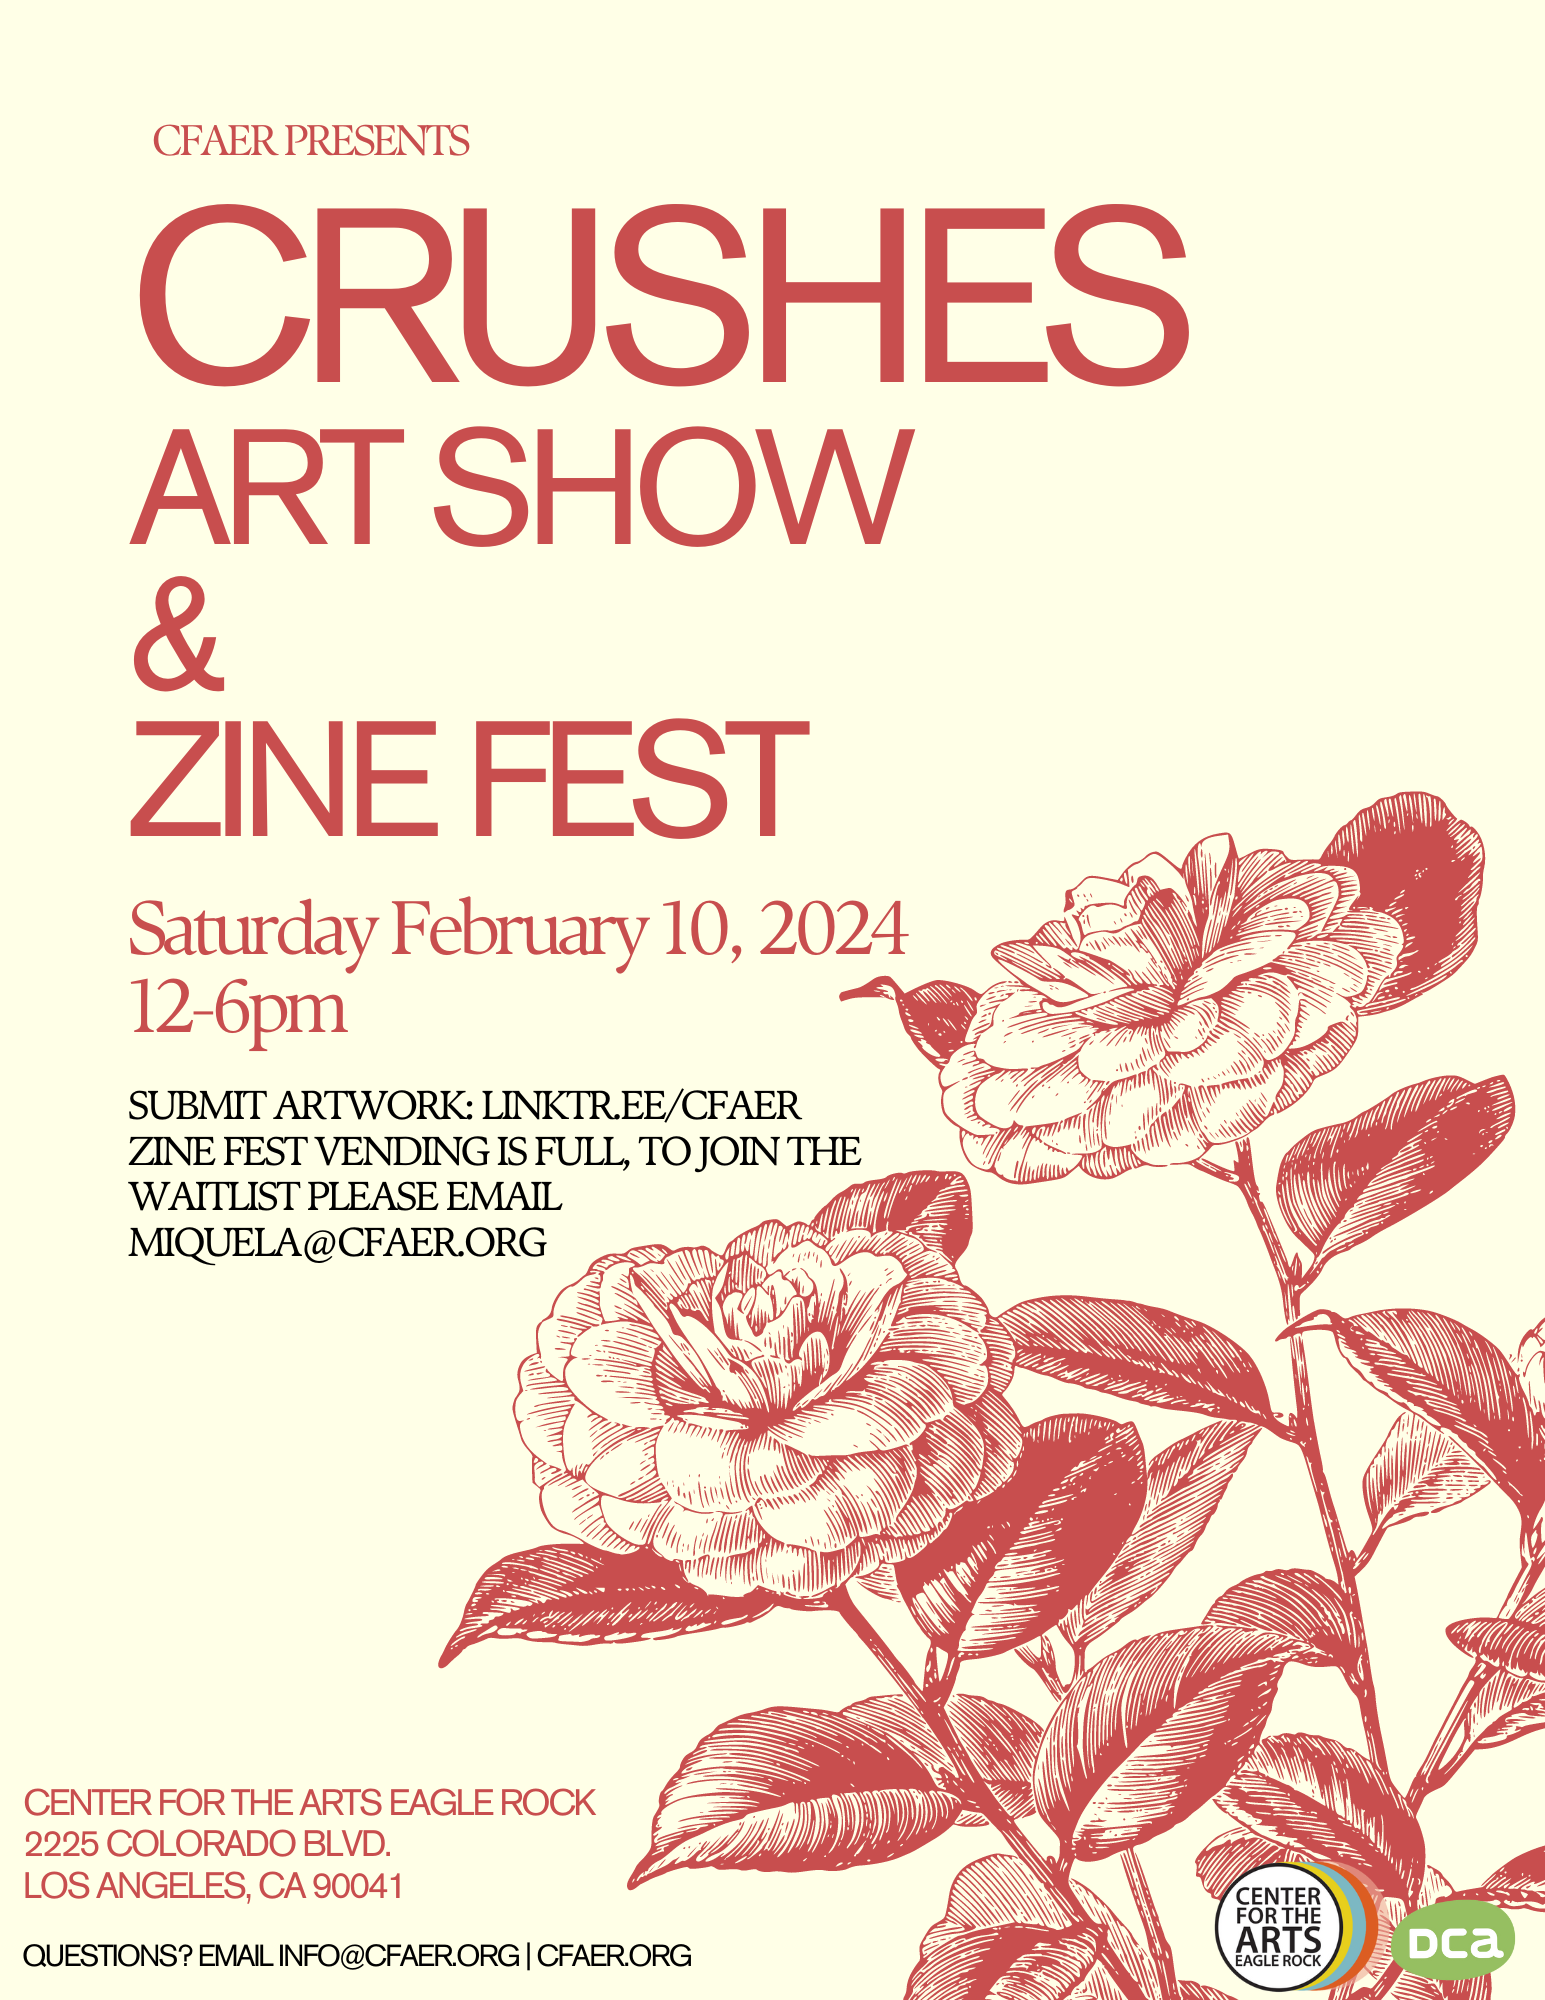 The image is a poster for an art show and zine fest organized by CFAER, featuring text and a plant illustration on the book cover. The event is scheduled for Saturday, February 10, 2024, from 12-6pm at the Center for the Arts Eagle Rock in Los Angeles, California. The poster also includes information on submitting artwork and joining the waitlist for vending at the zine fest.